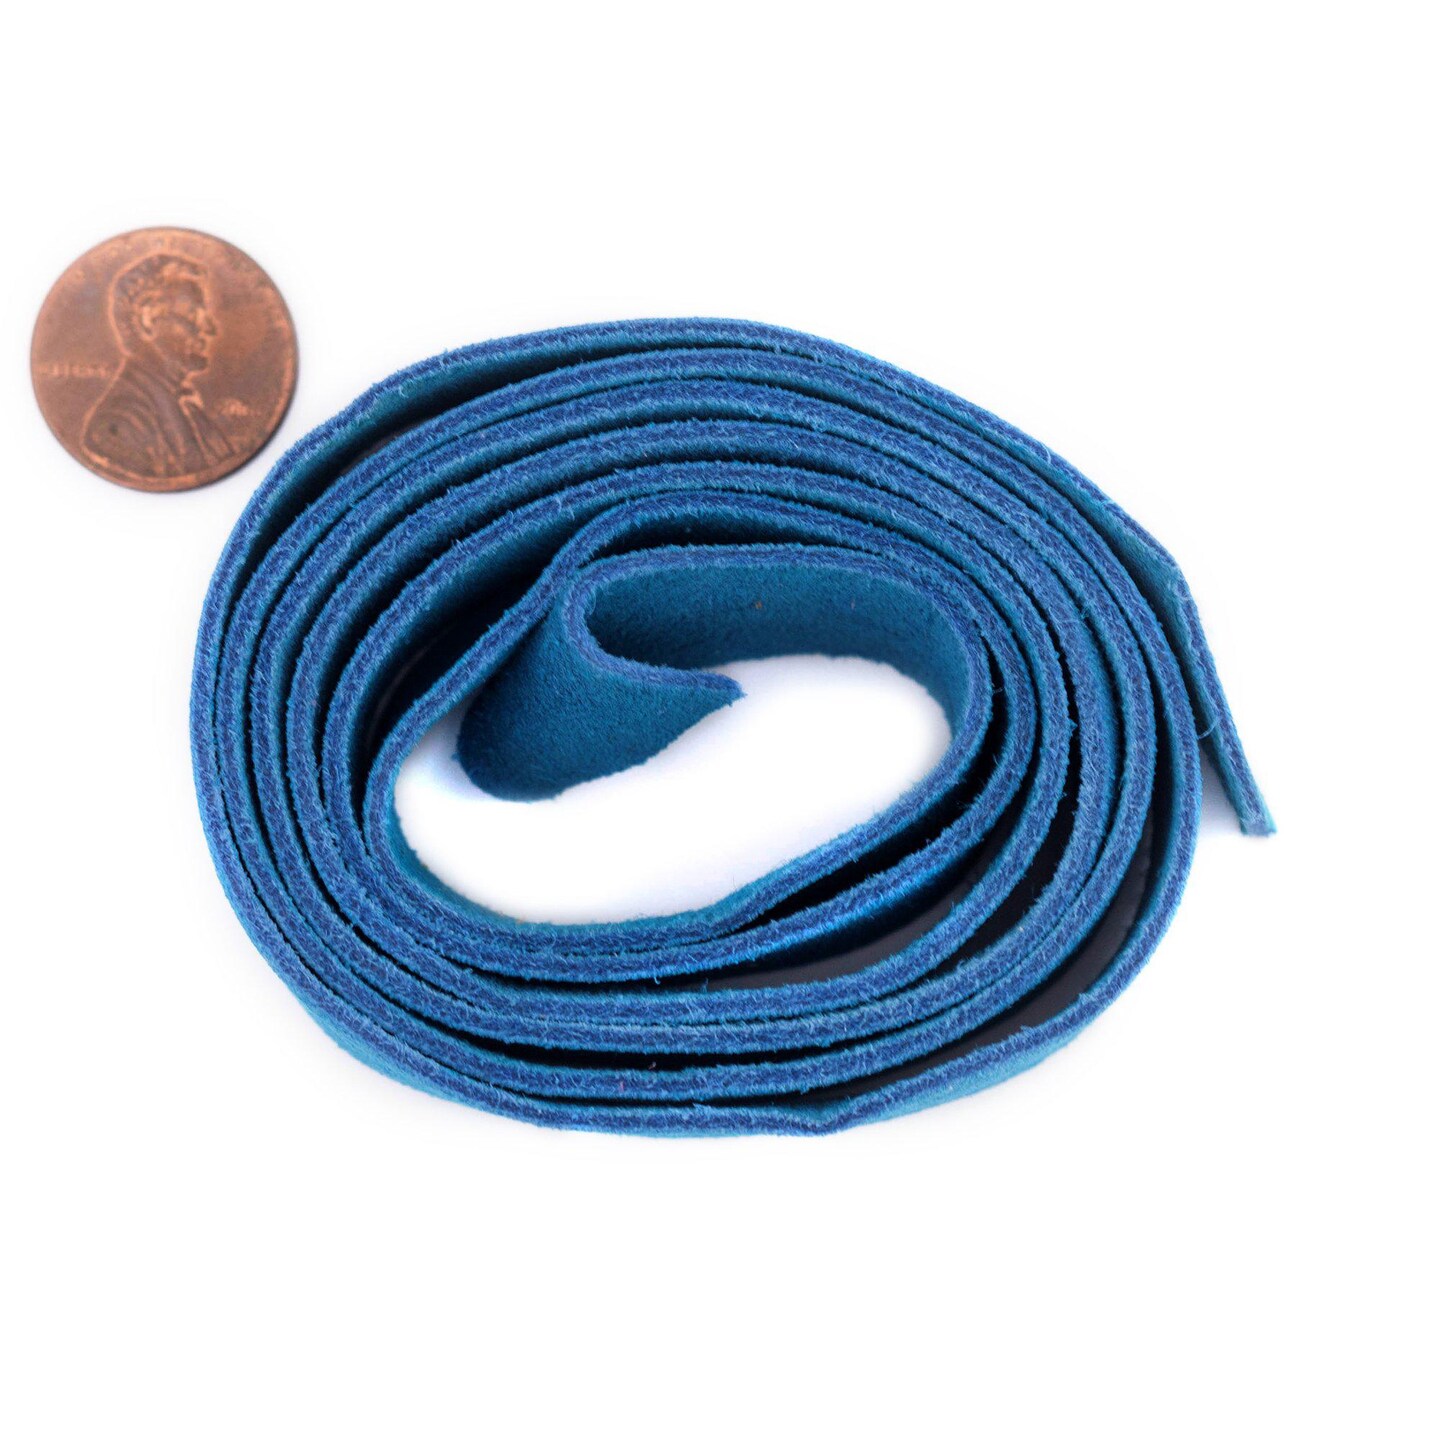 TheBeadChest 20mm Blue Flat Suede Leather Cord (3ft)